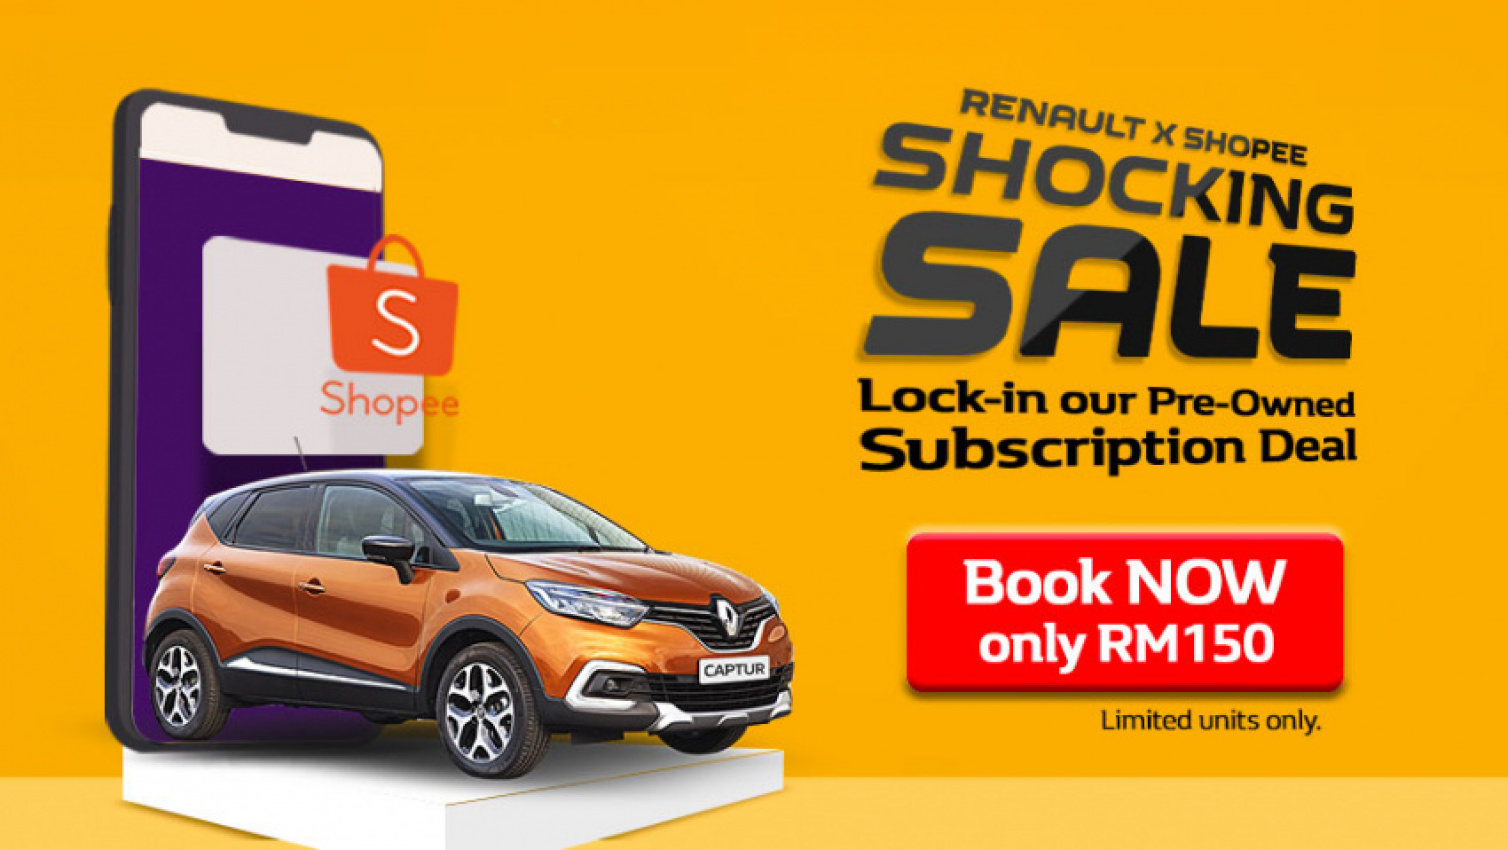 autos, car brands, cars, renault, automotive, cars, crossover, e-store, gocar, malaysia, pre-owned, promotion, renault subscription, shopee, subscription, tc euro cars, renault pre-owned captur subscription offers more savings via limited time promotion & shopee shocking sale